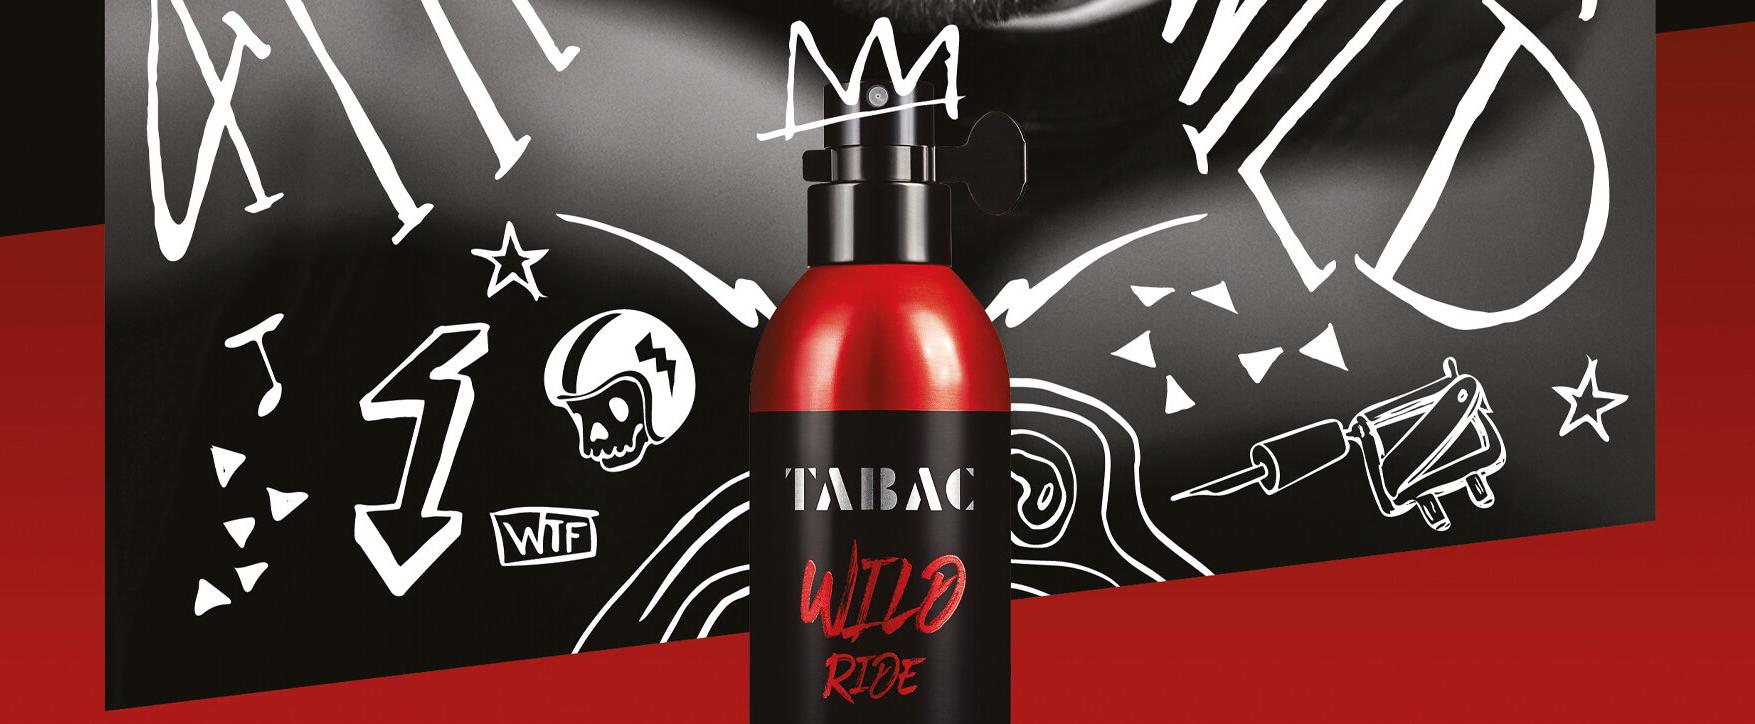 “Tabac Wild Ride” - New Version of the Cult Fragrance by Mäurer & Wirtz